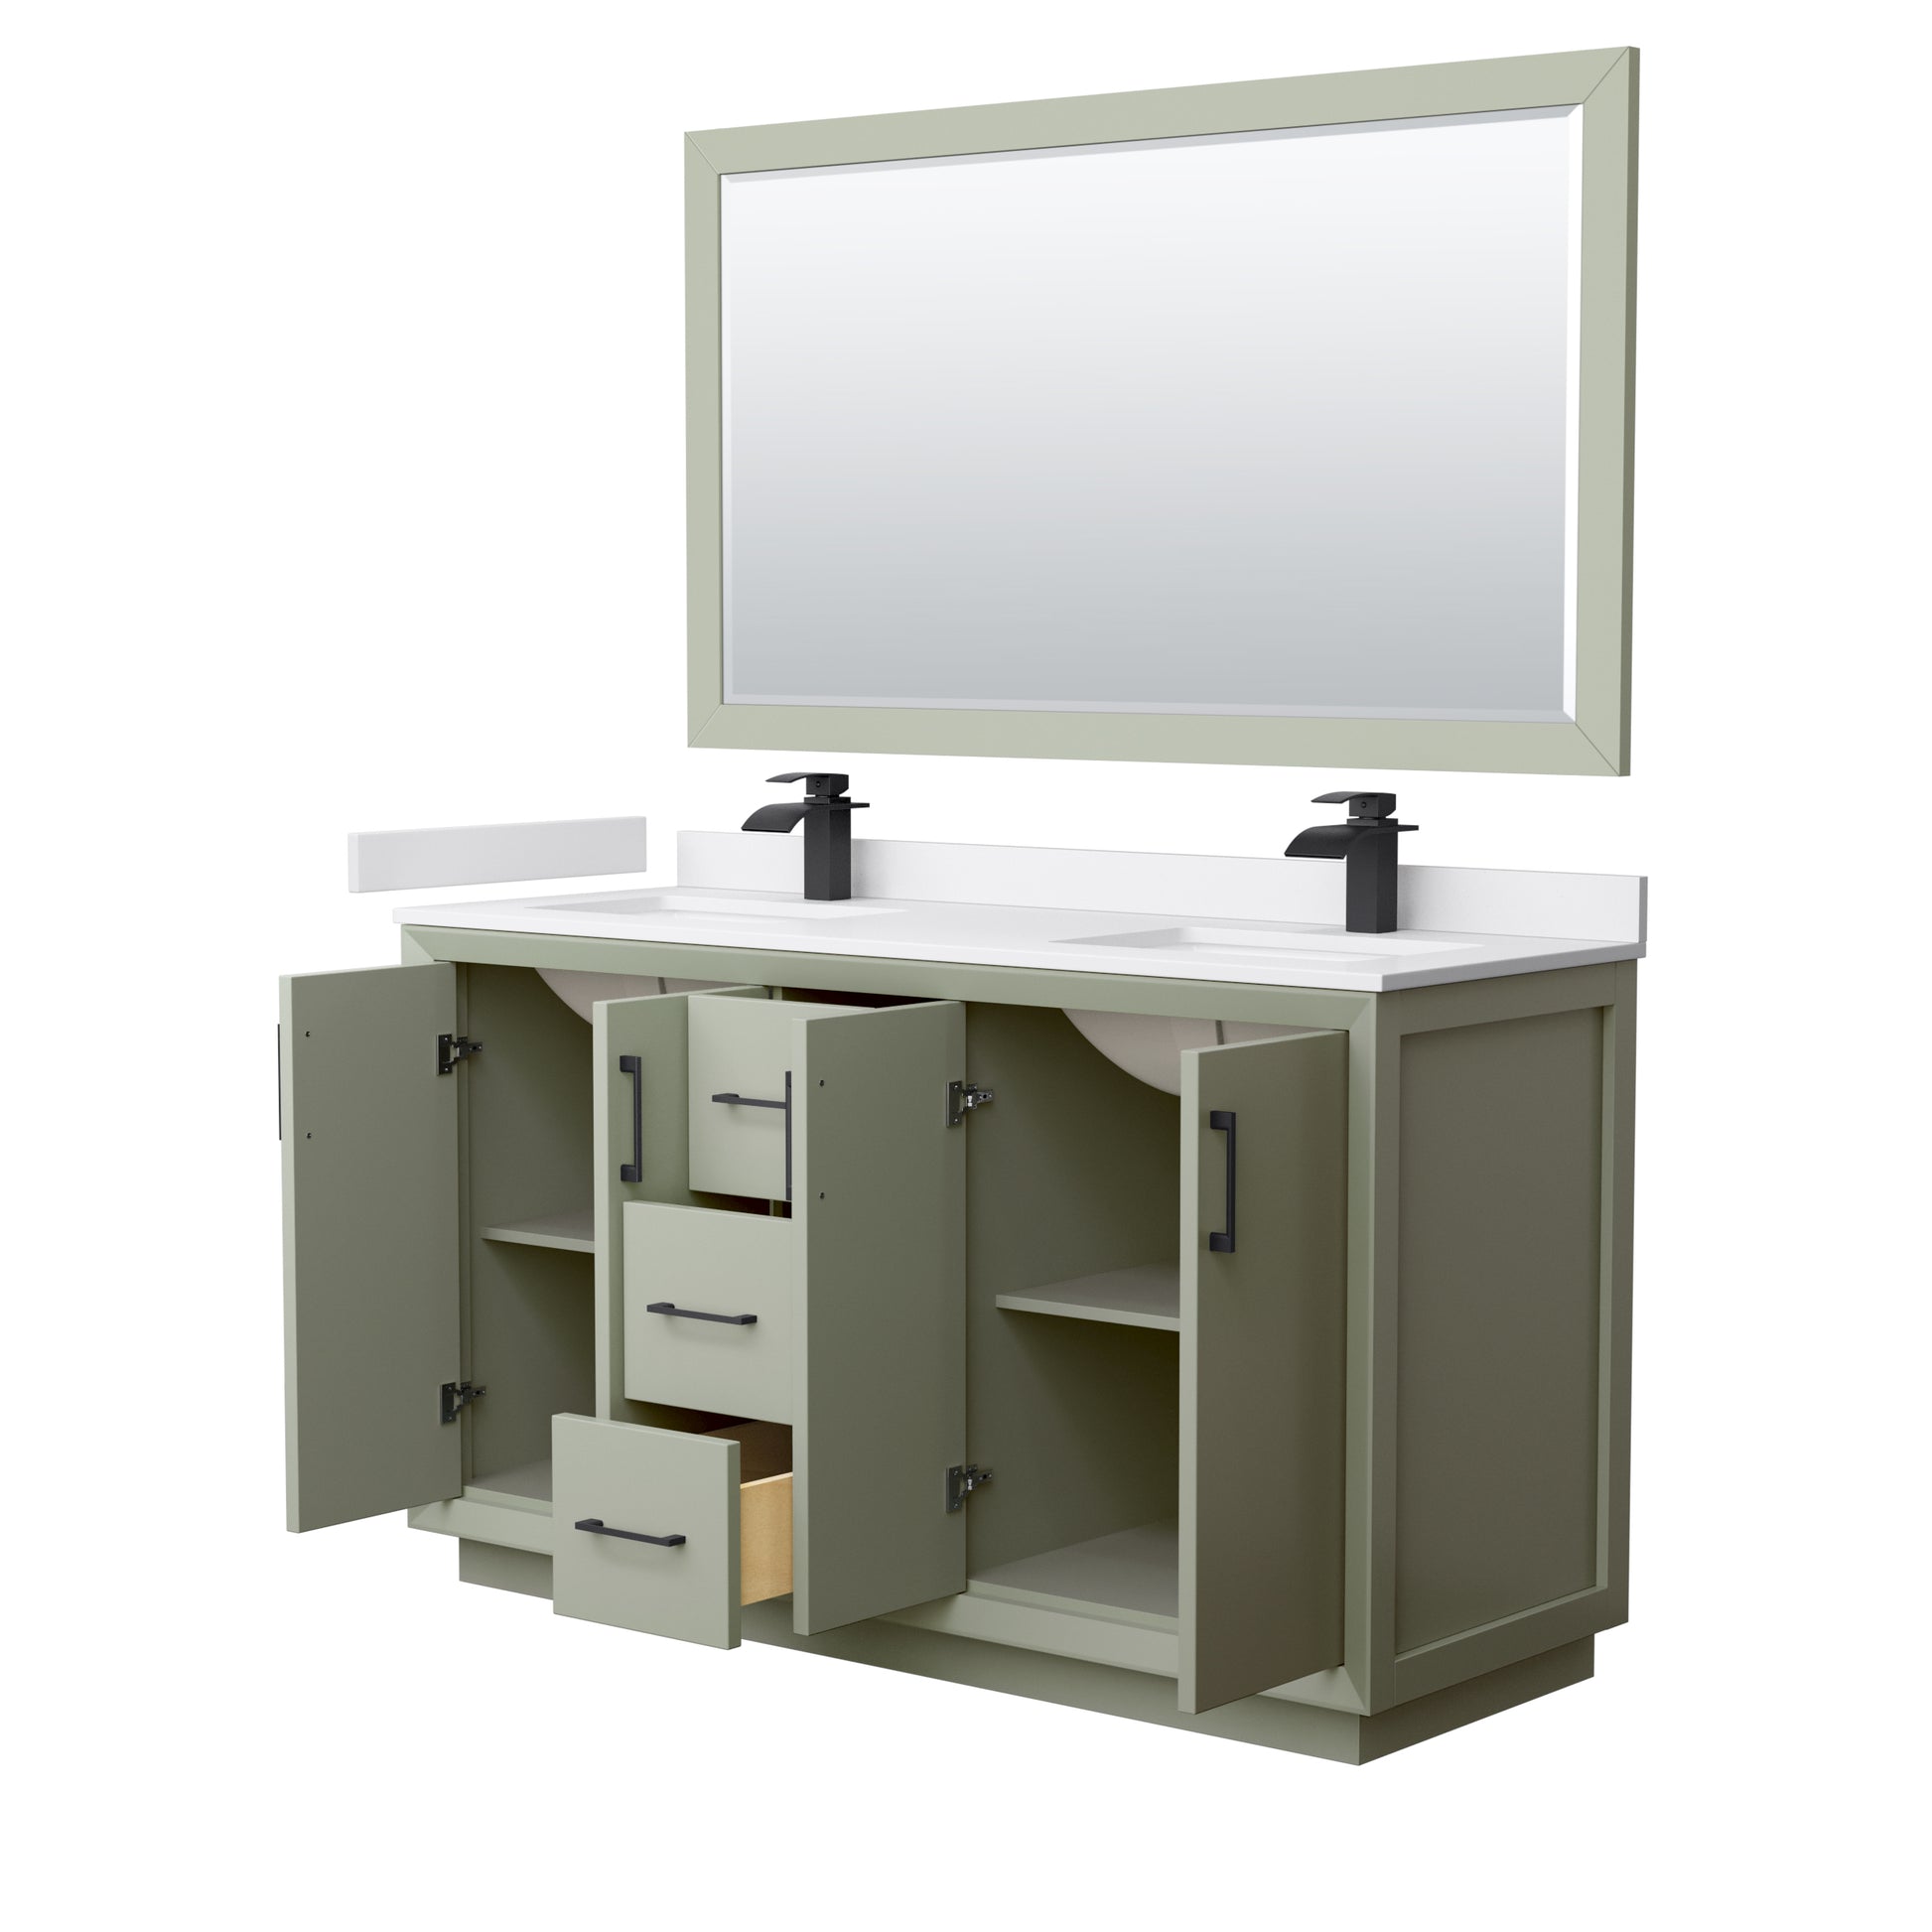 
  
  Strada Double Sink Vanity with White Cultured Marble, Undermount Square Sink, Optional Trim and Mirror
  
